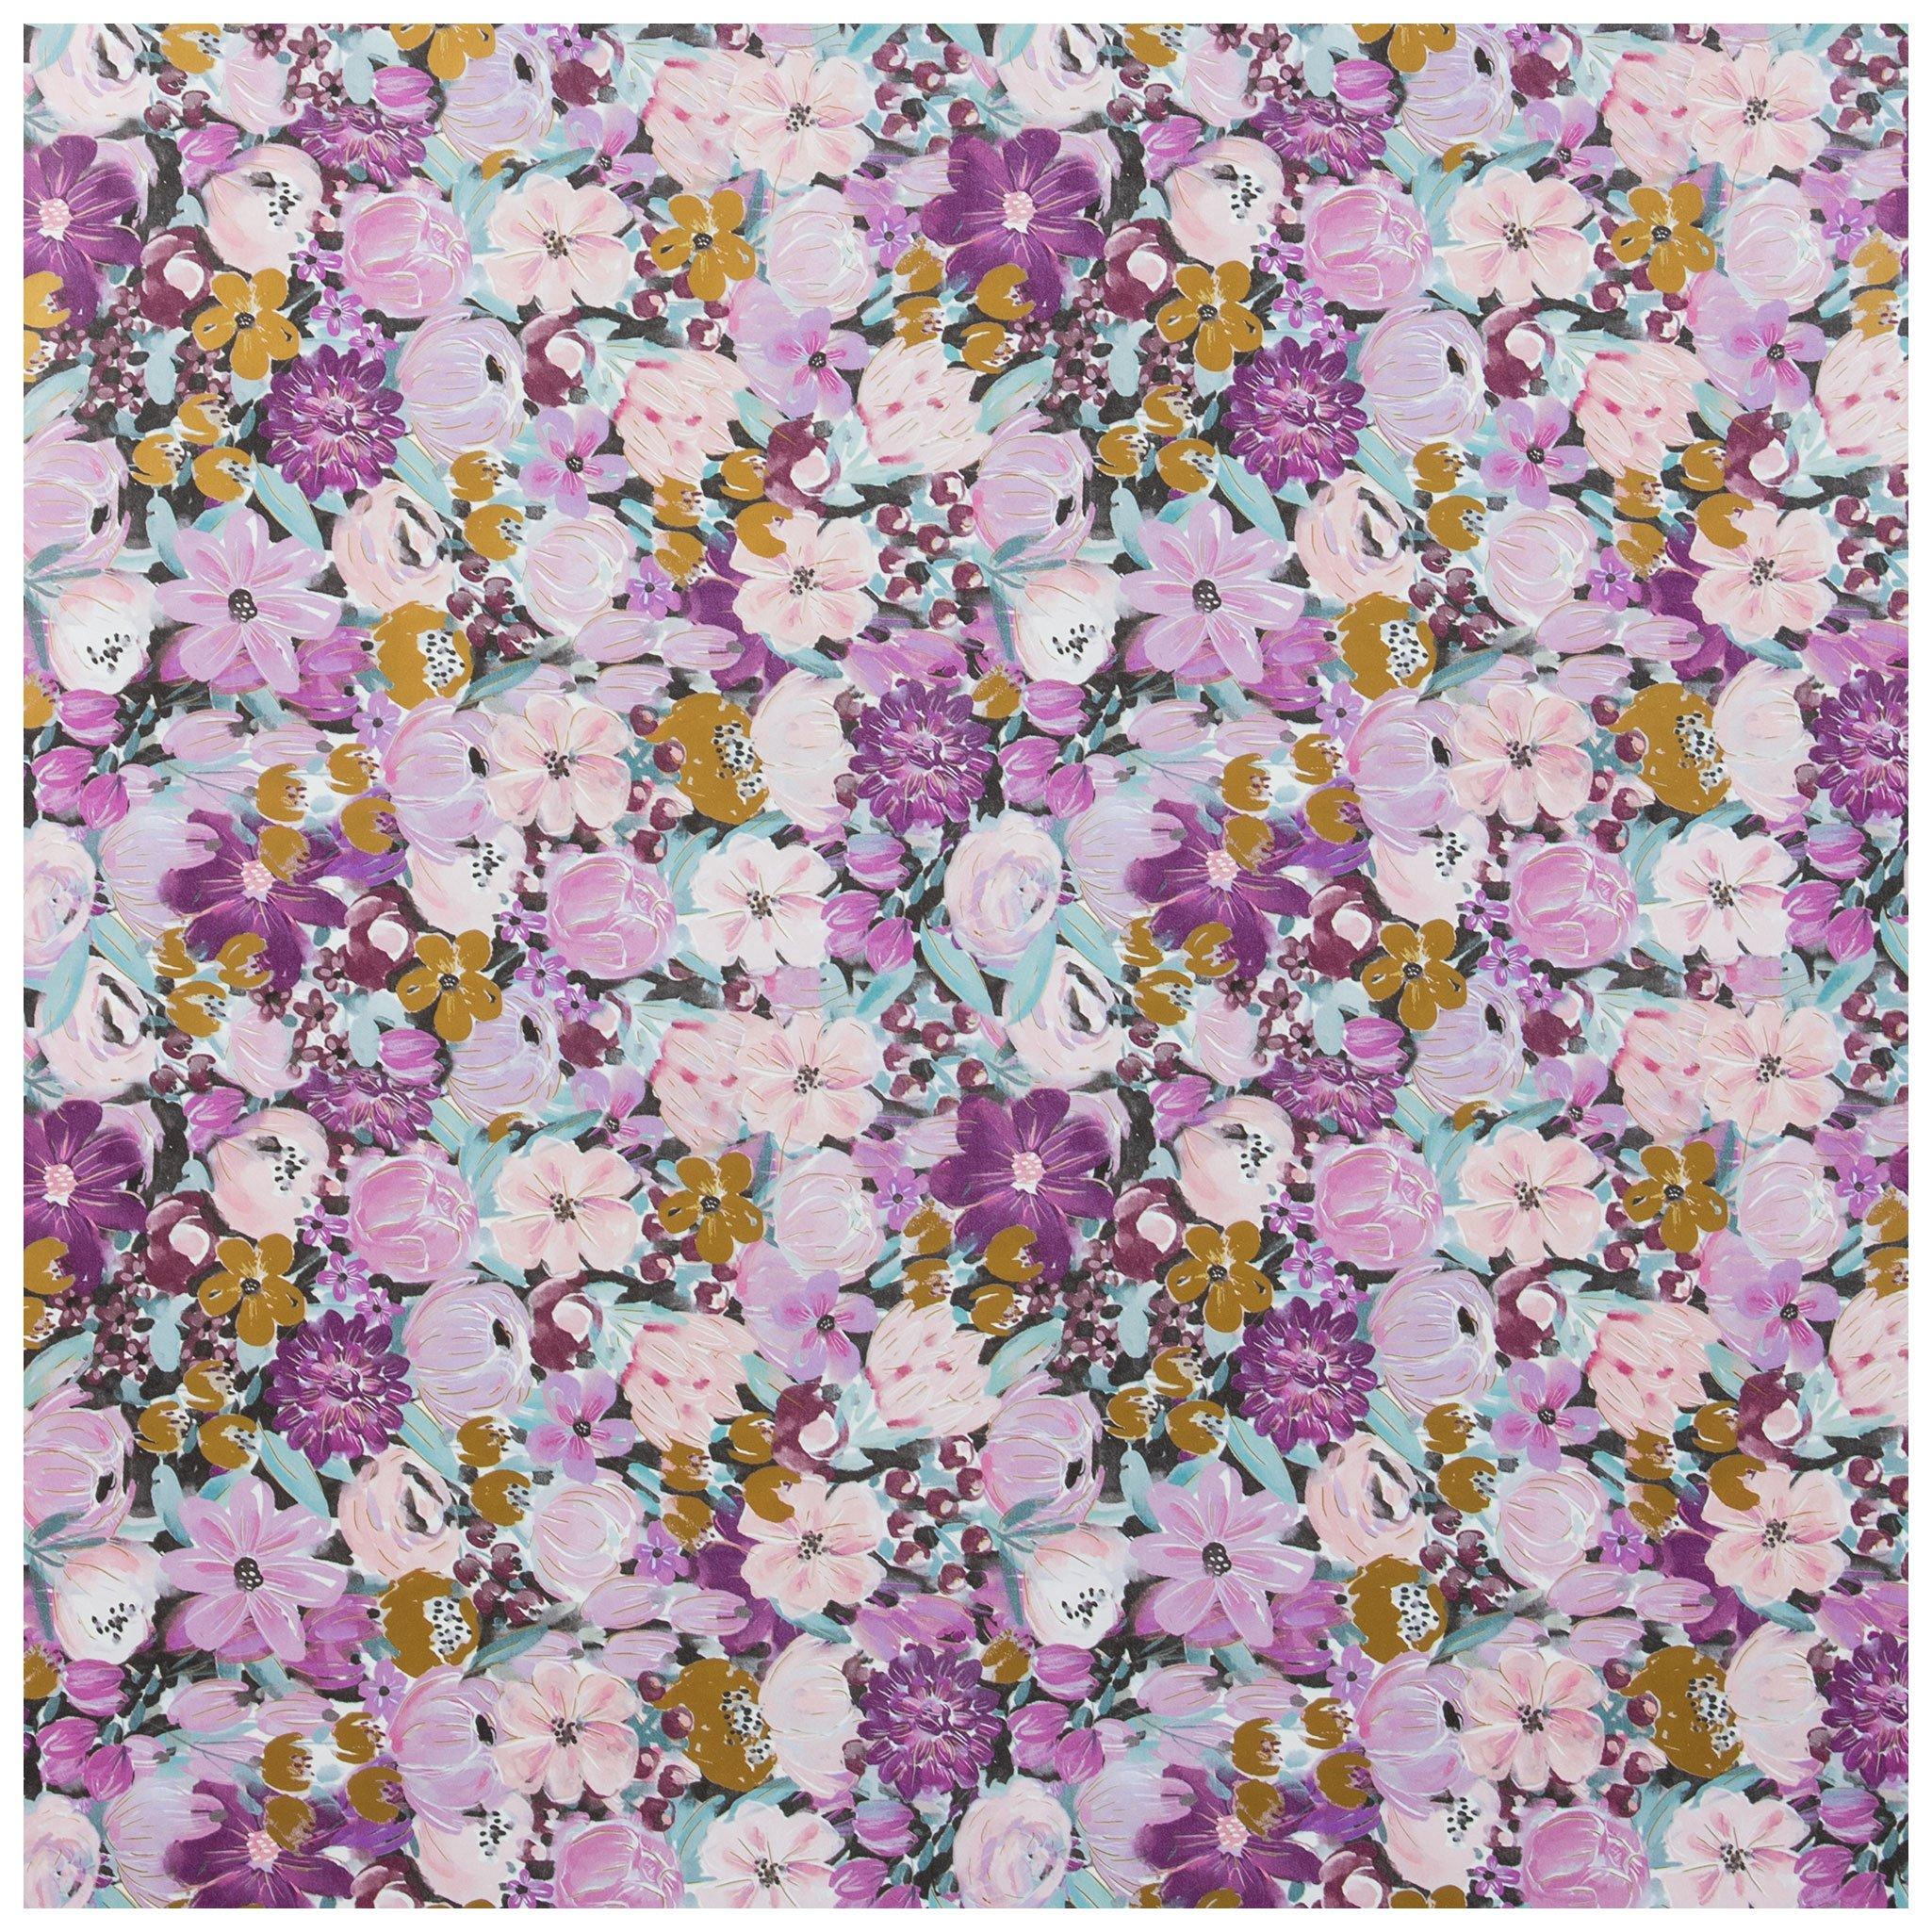 Teal Web Floral Wrapping Paper - 5 Yards - LO Florist Supplies